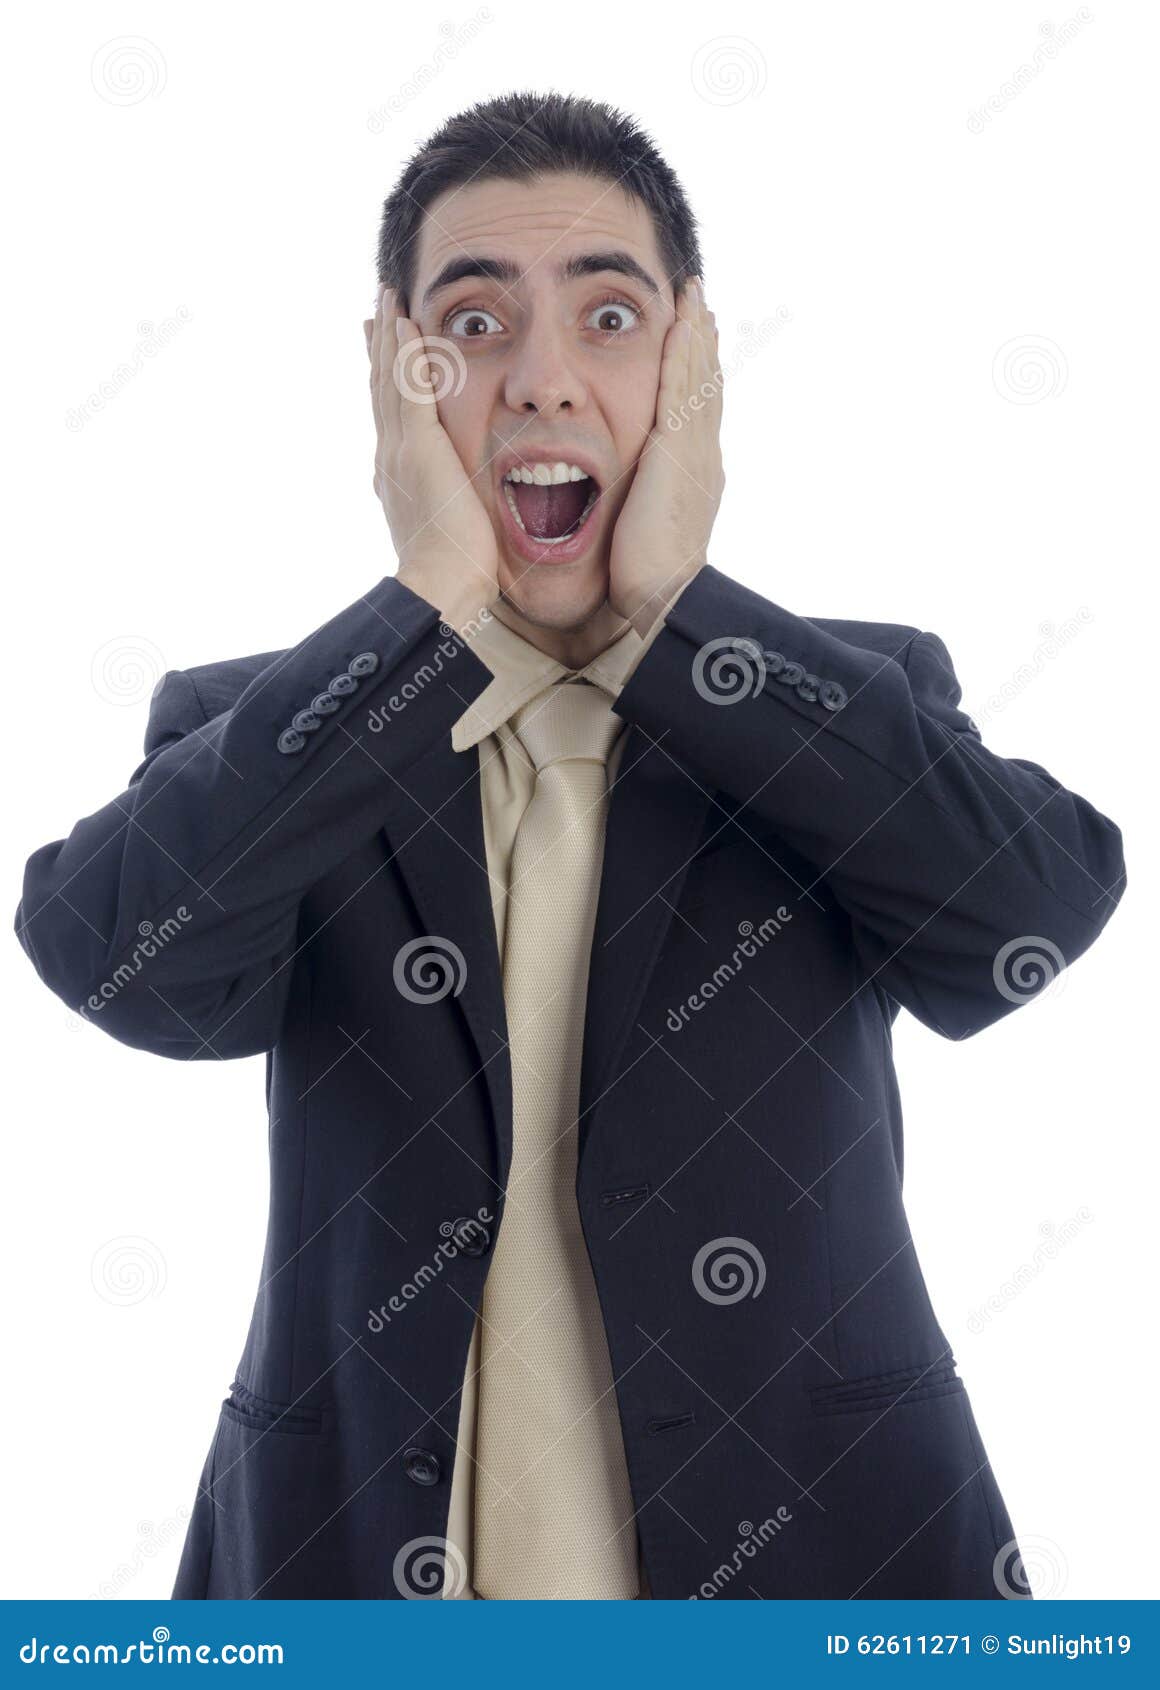 man in business suit with his hands on his face shouting in desperation